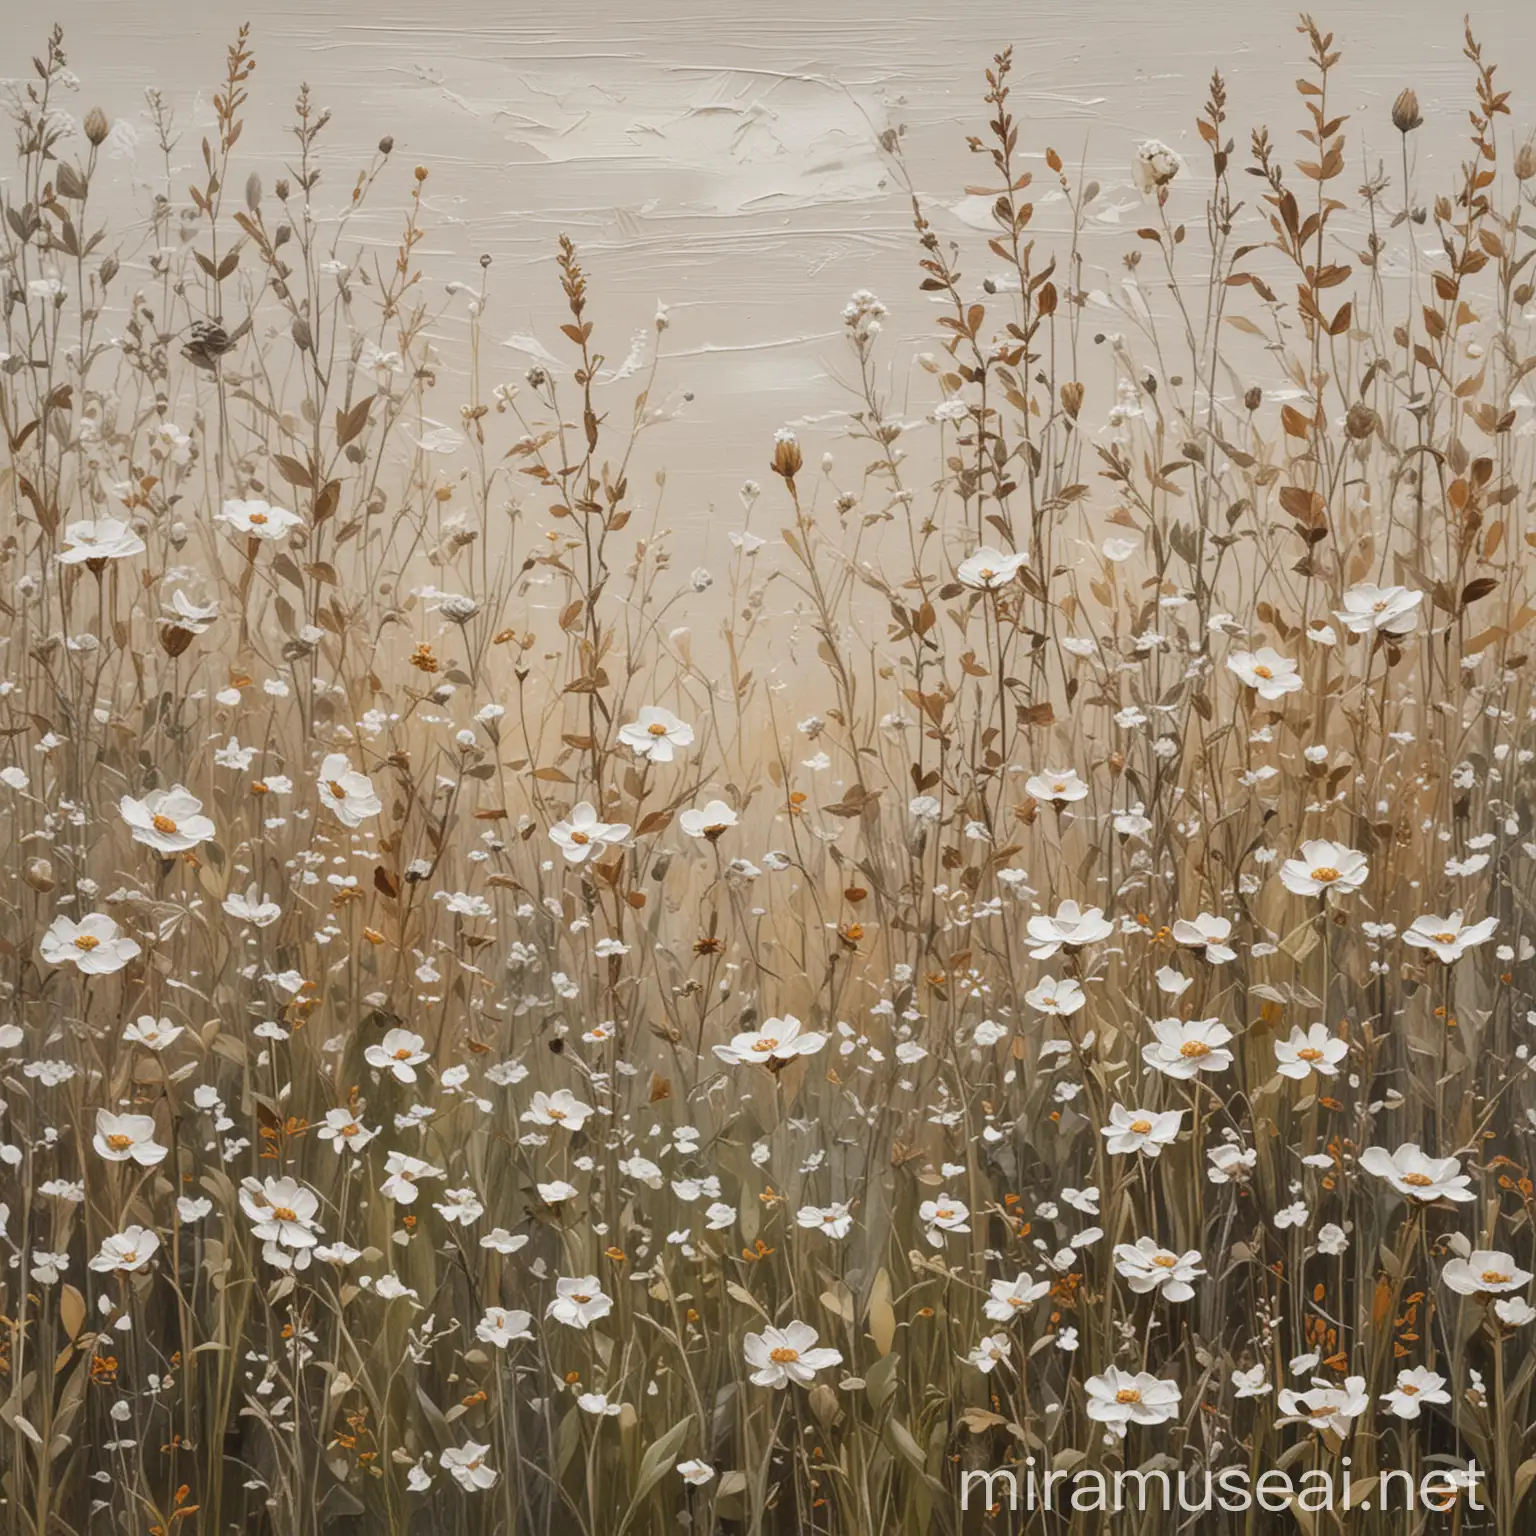 linen canvas texture oil painting, incredibly intricate, textured and detailed very abstract neutral wildflower meadow with delicate overgrown shrubs and wildflower bushes, using only muted shades of beige, grey, brown, white, enormous texture, grain, blotting, smears and imperfections in paint, shrubs/wildflowers primary focus,